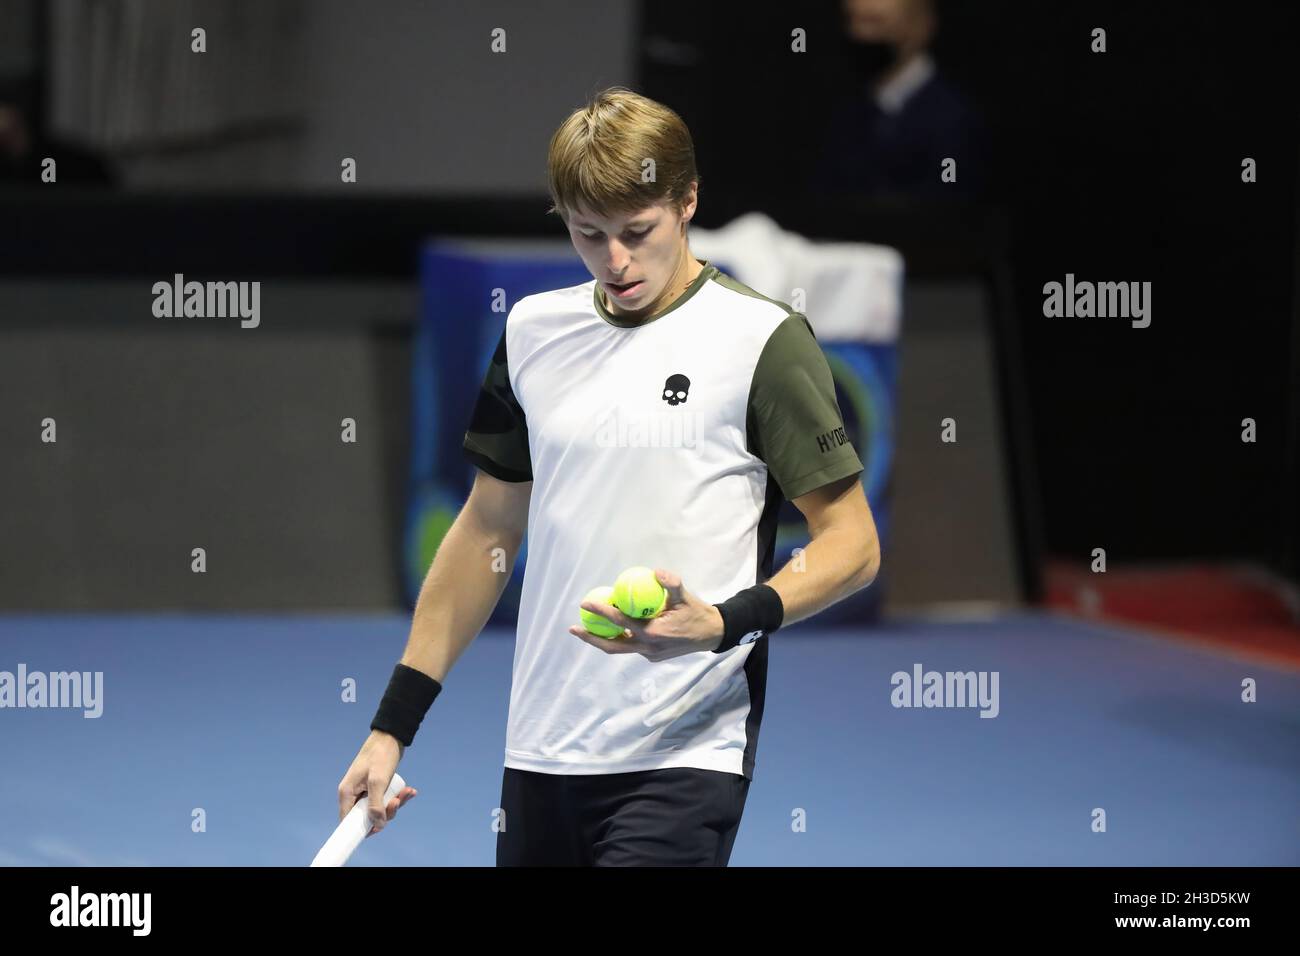 St. Petersburg, Russia. 27th Oct, 2021. Ilya Ivashka of Belarus seen in action during a match against Andrey Rublev of Russia at the St